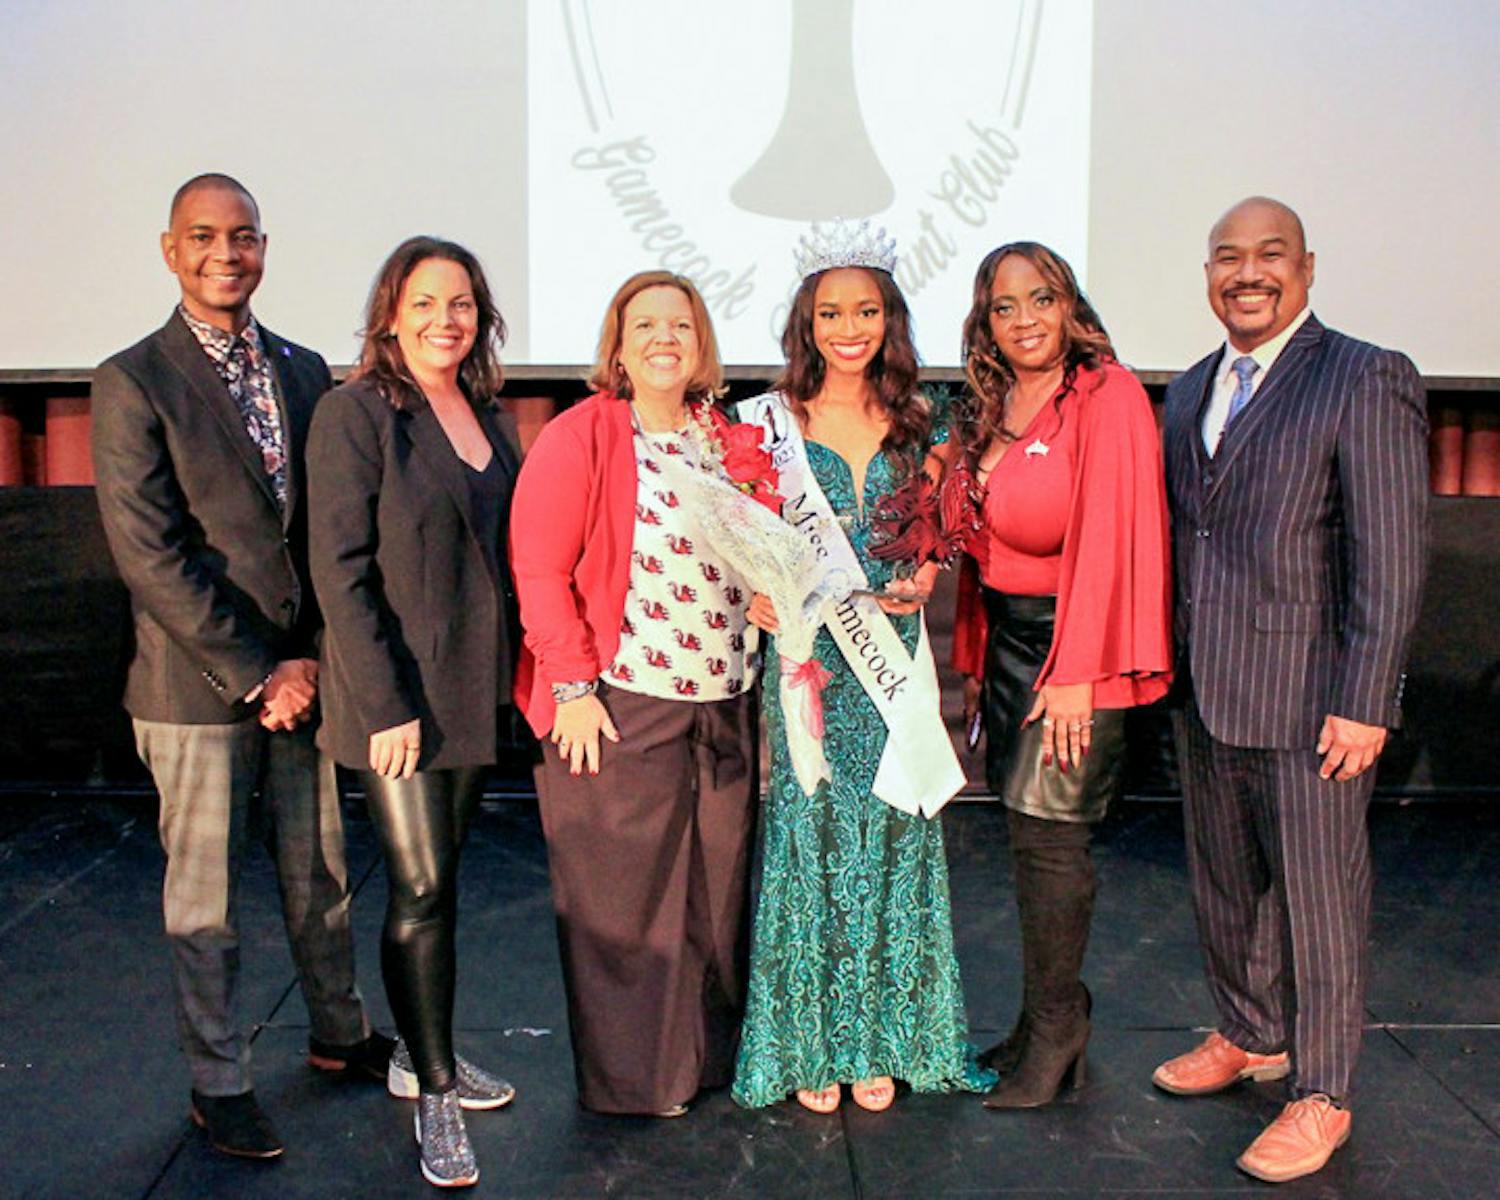 Third-year retail student Jordyn Lewis (center, right) stands amongst judges after winning the Miss Gamecock pageant on Nov. 12, 2022. This was Lewis' first time entering the pageant, and she is the second Black woman to win the contest in 鶹С򽴫ý history.